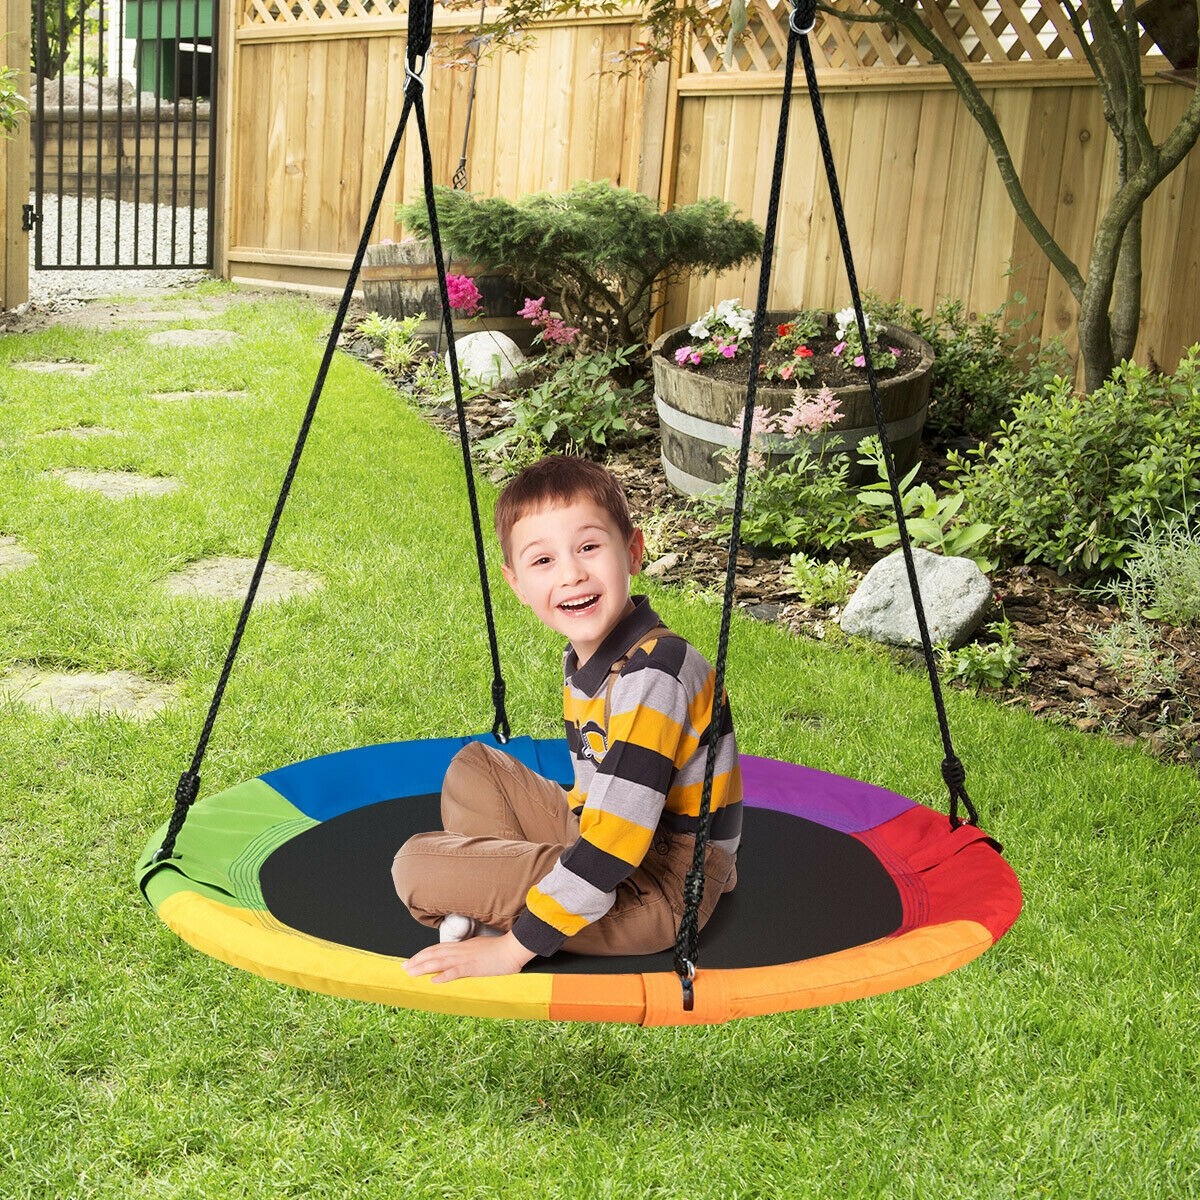 40 In. Flying Saucer Tree Swing Outdoor Play For Kids